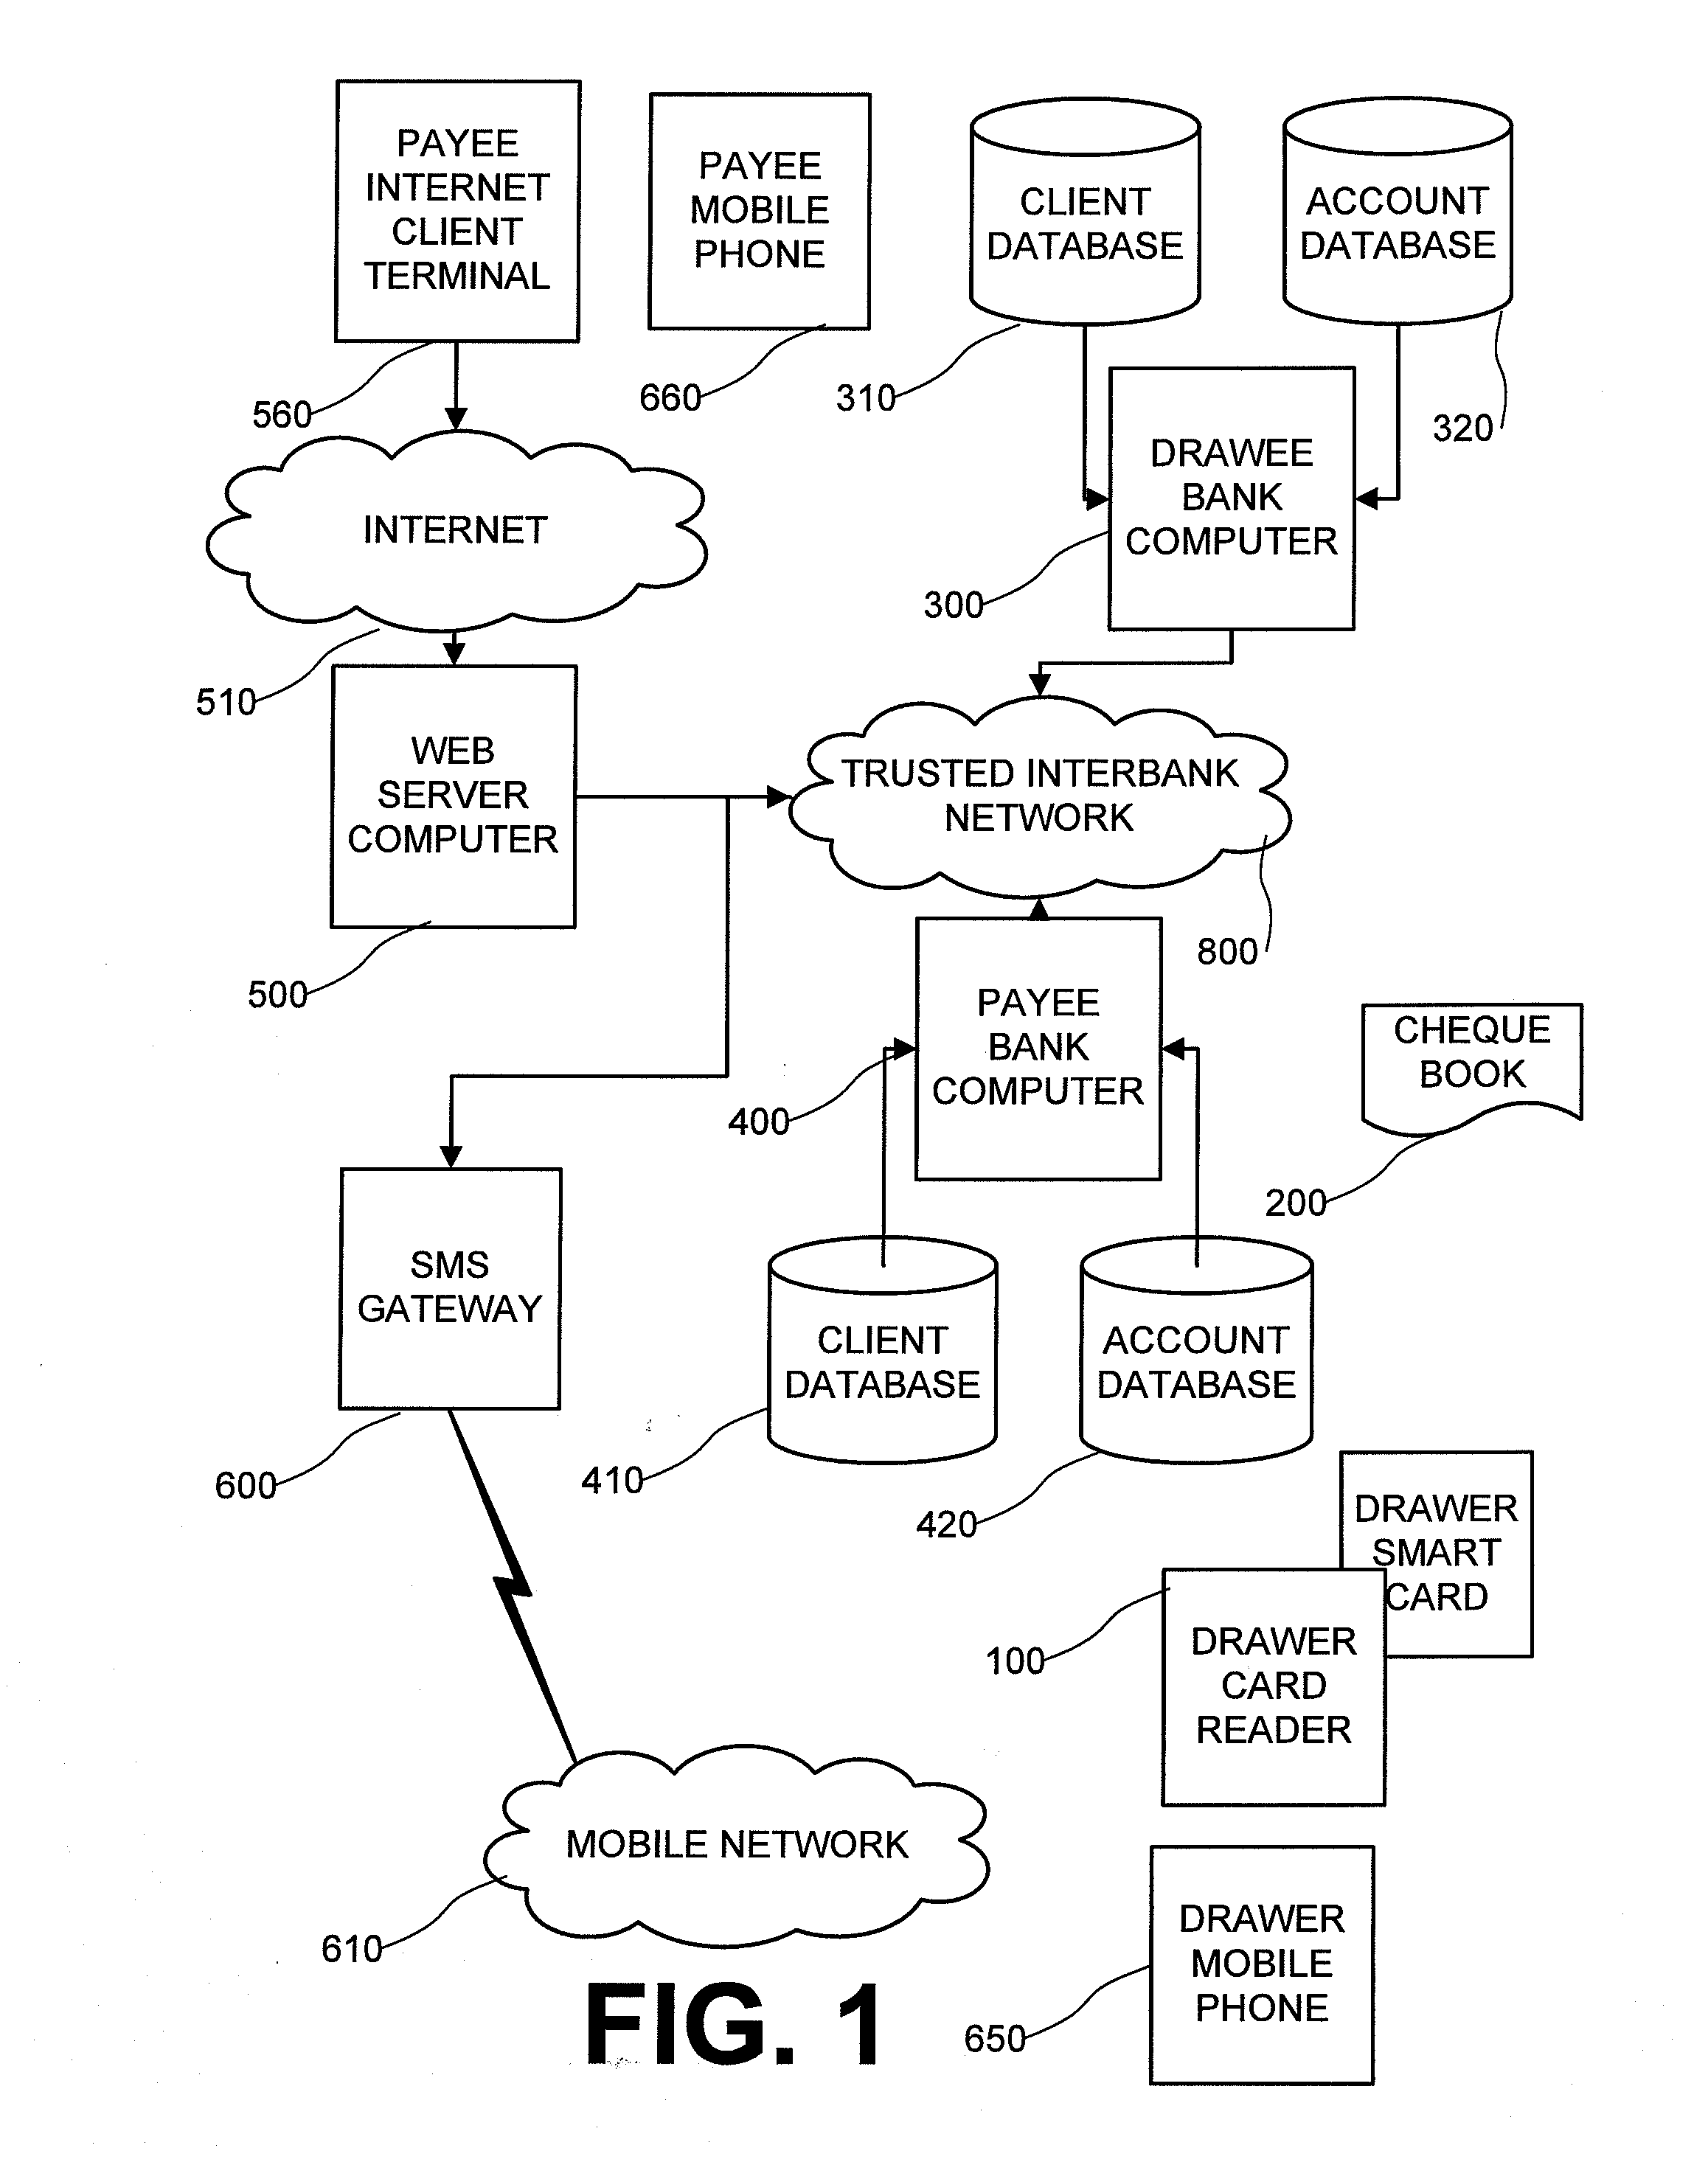 Computer system and method for initiating payments based on cheques